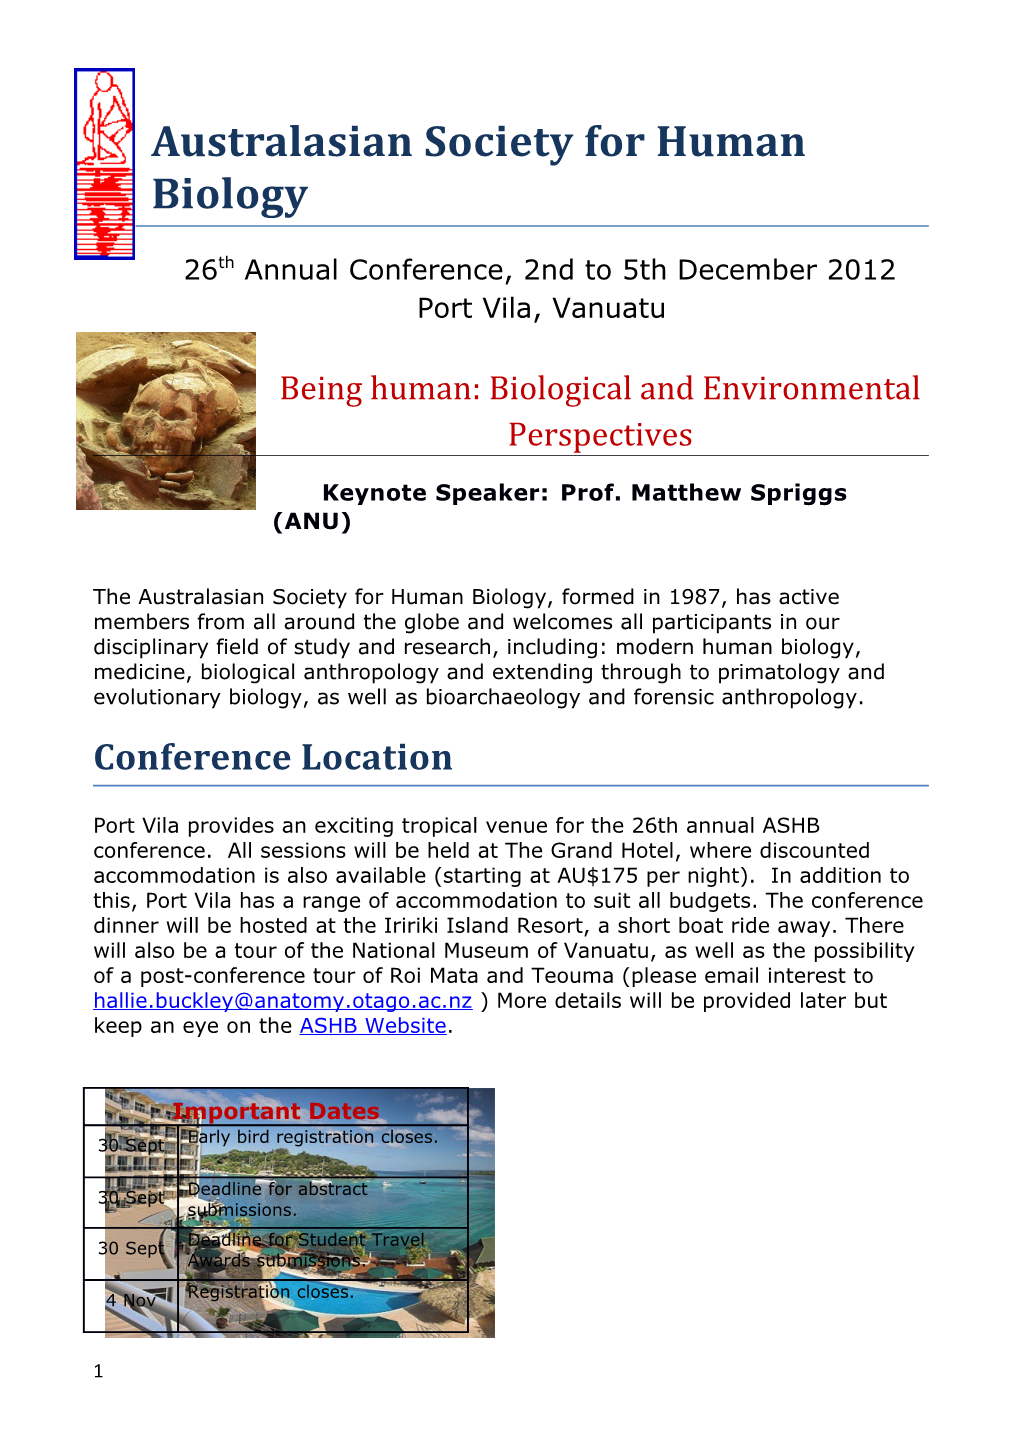 Being Human:Biological and Environmental Perspectives